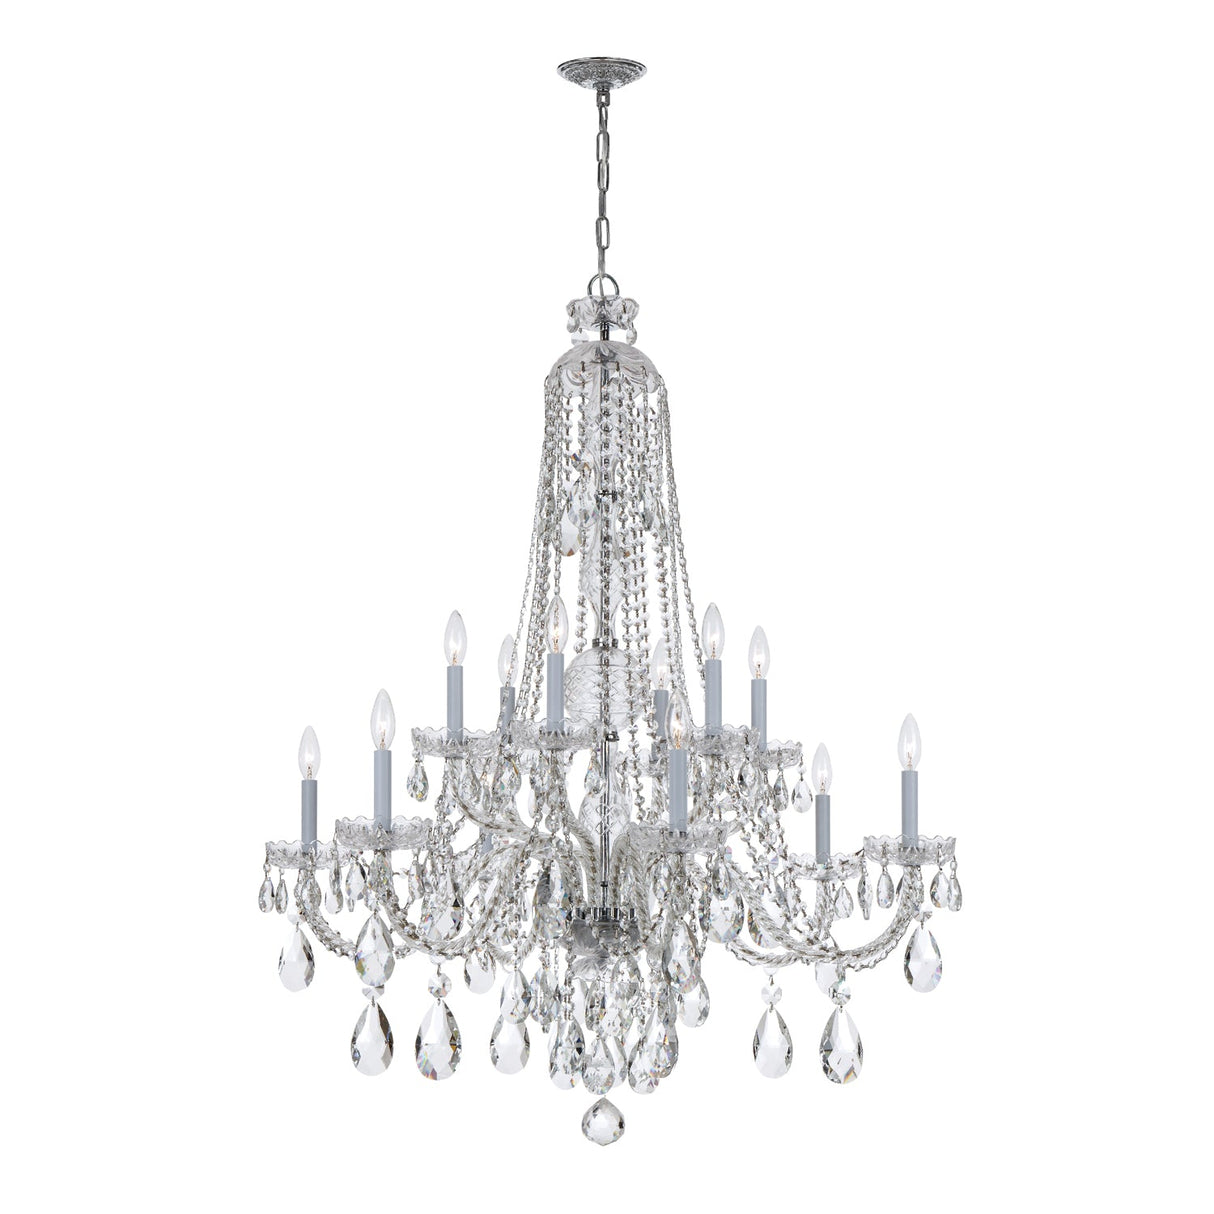 Traditional Crystal 12 Light Spectra Crystal Polished Chrome Chandelier 1112-CH-CL-SAQ